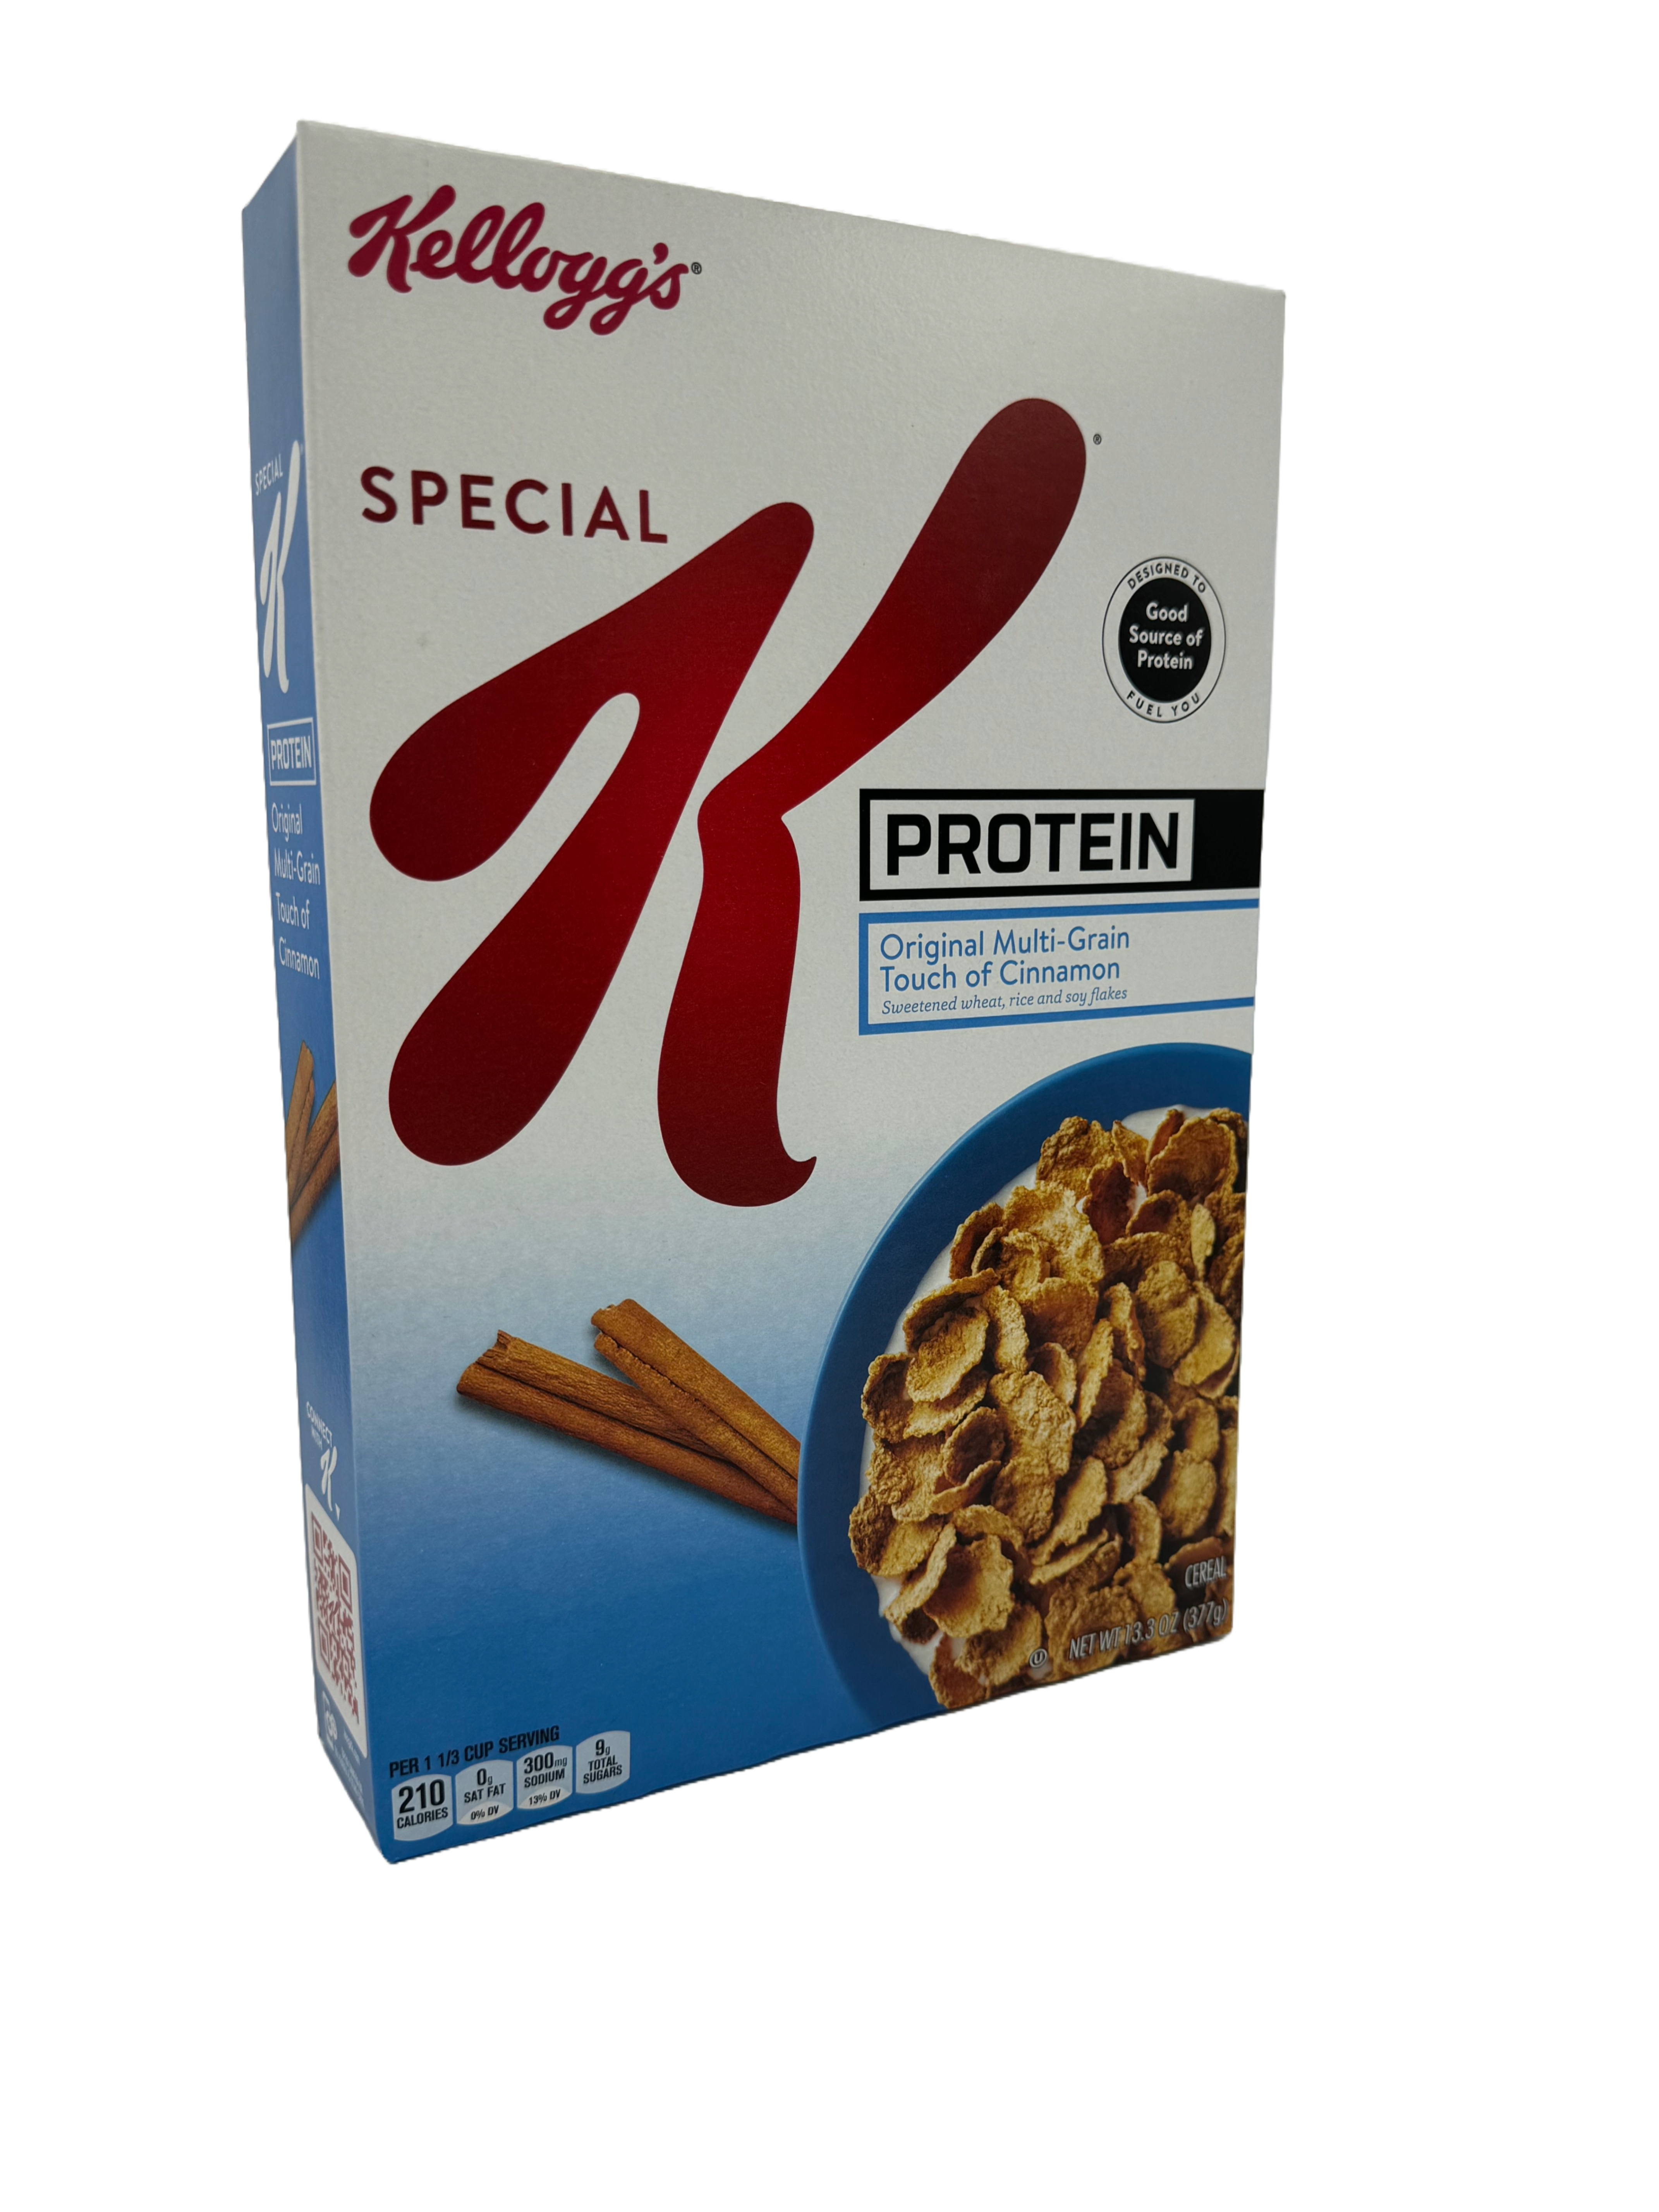 Kellogg's Special K Protein Cereal 12.5 oz by Kellogg's - Exclusive Offer  at $7.39 on Netrition